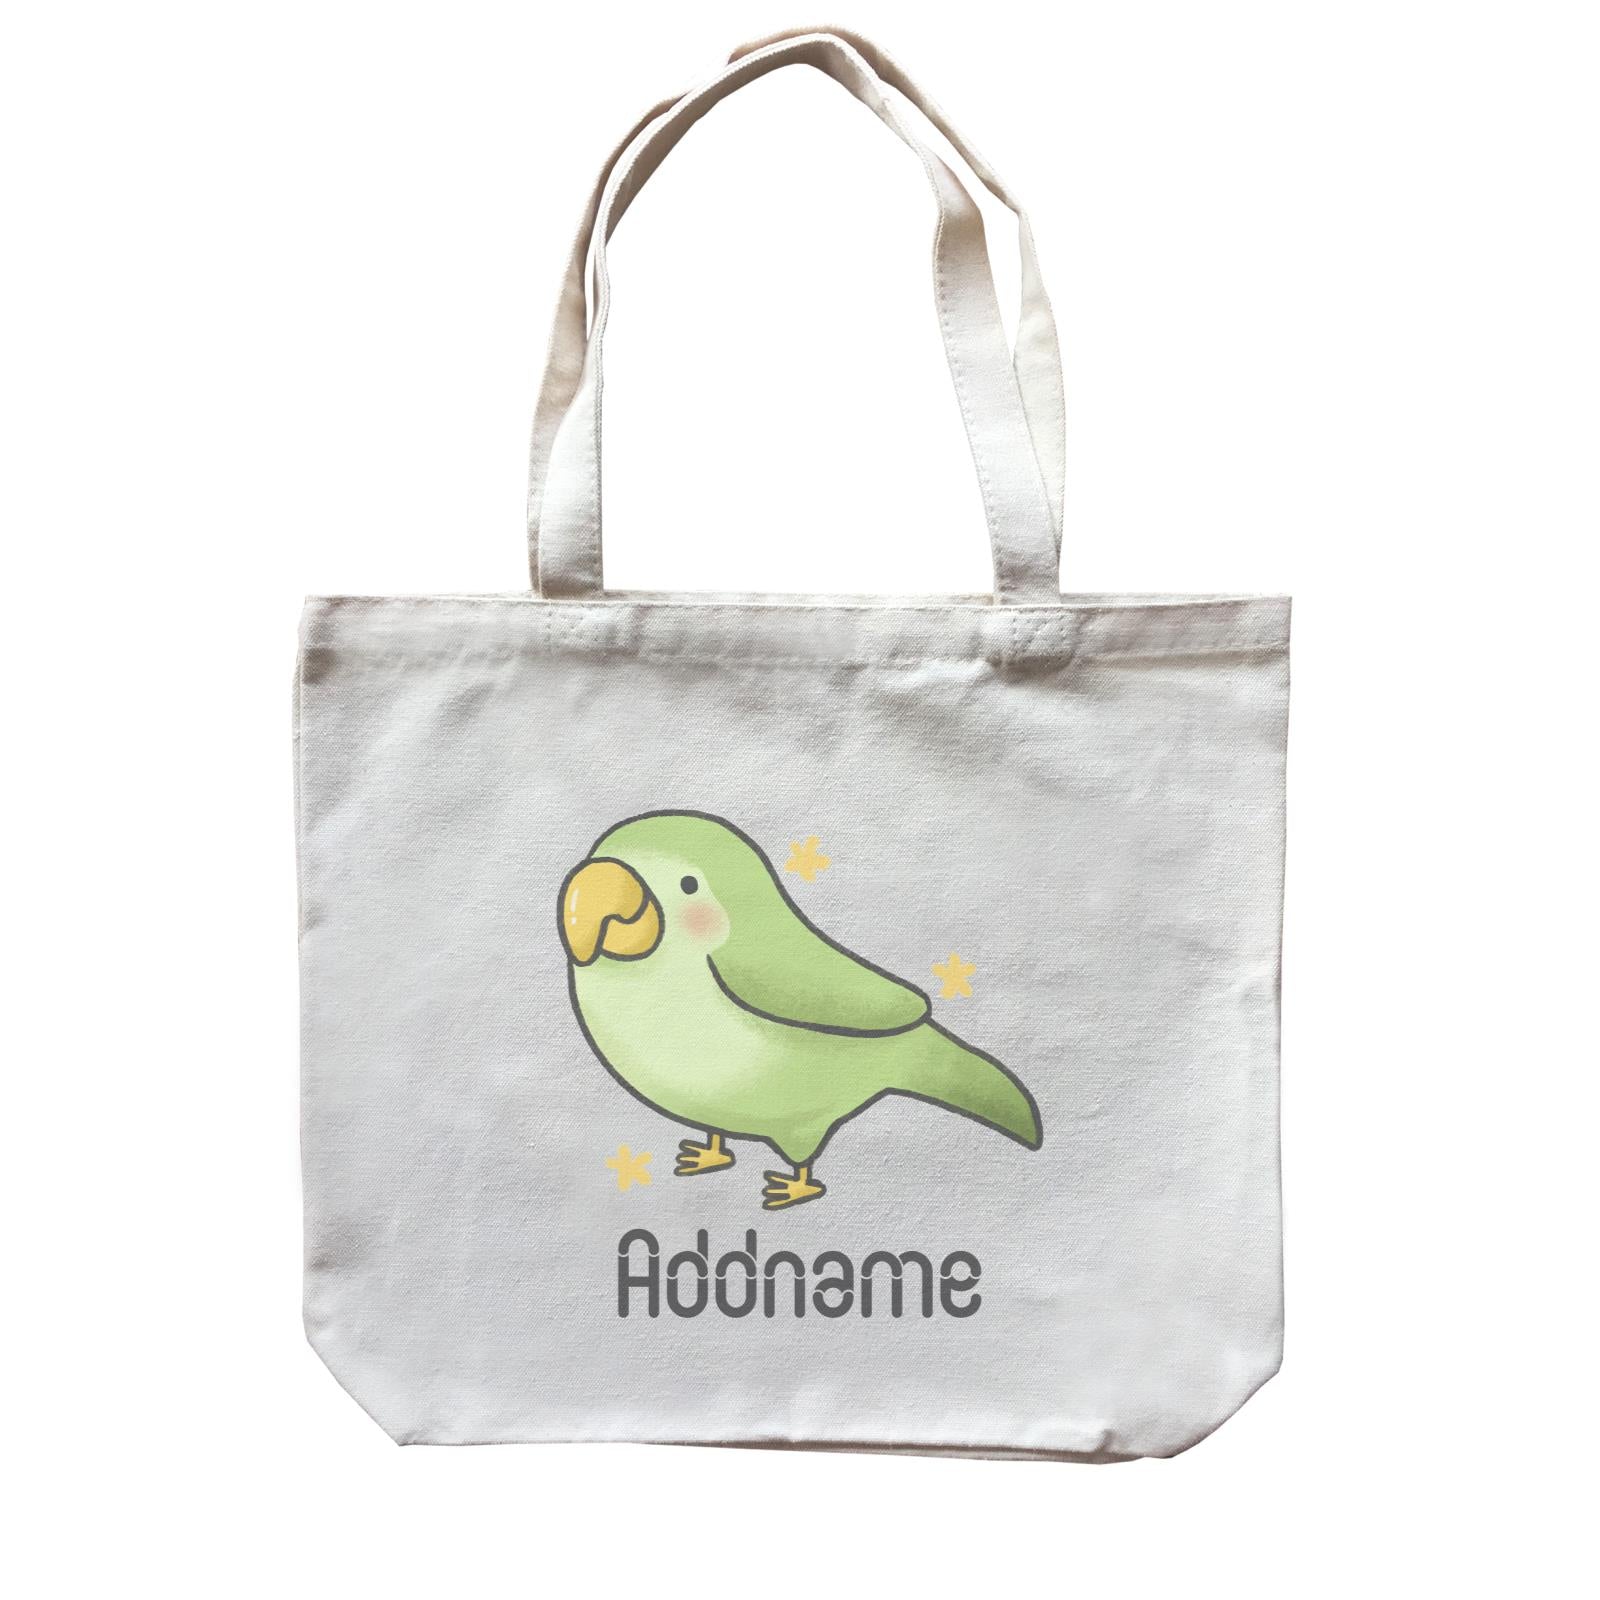 Cute Hand Drawn Style Parrot Addname Canvas Bag